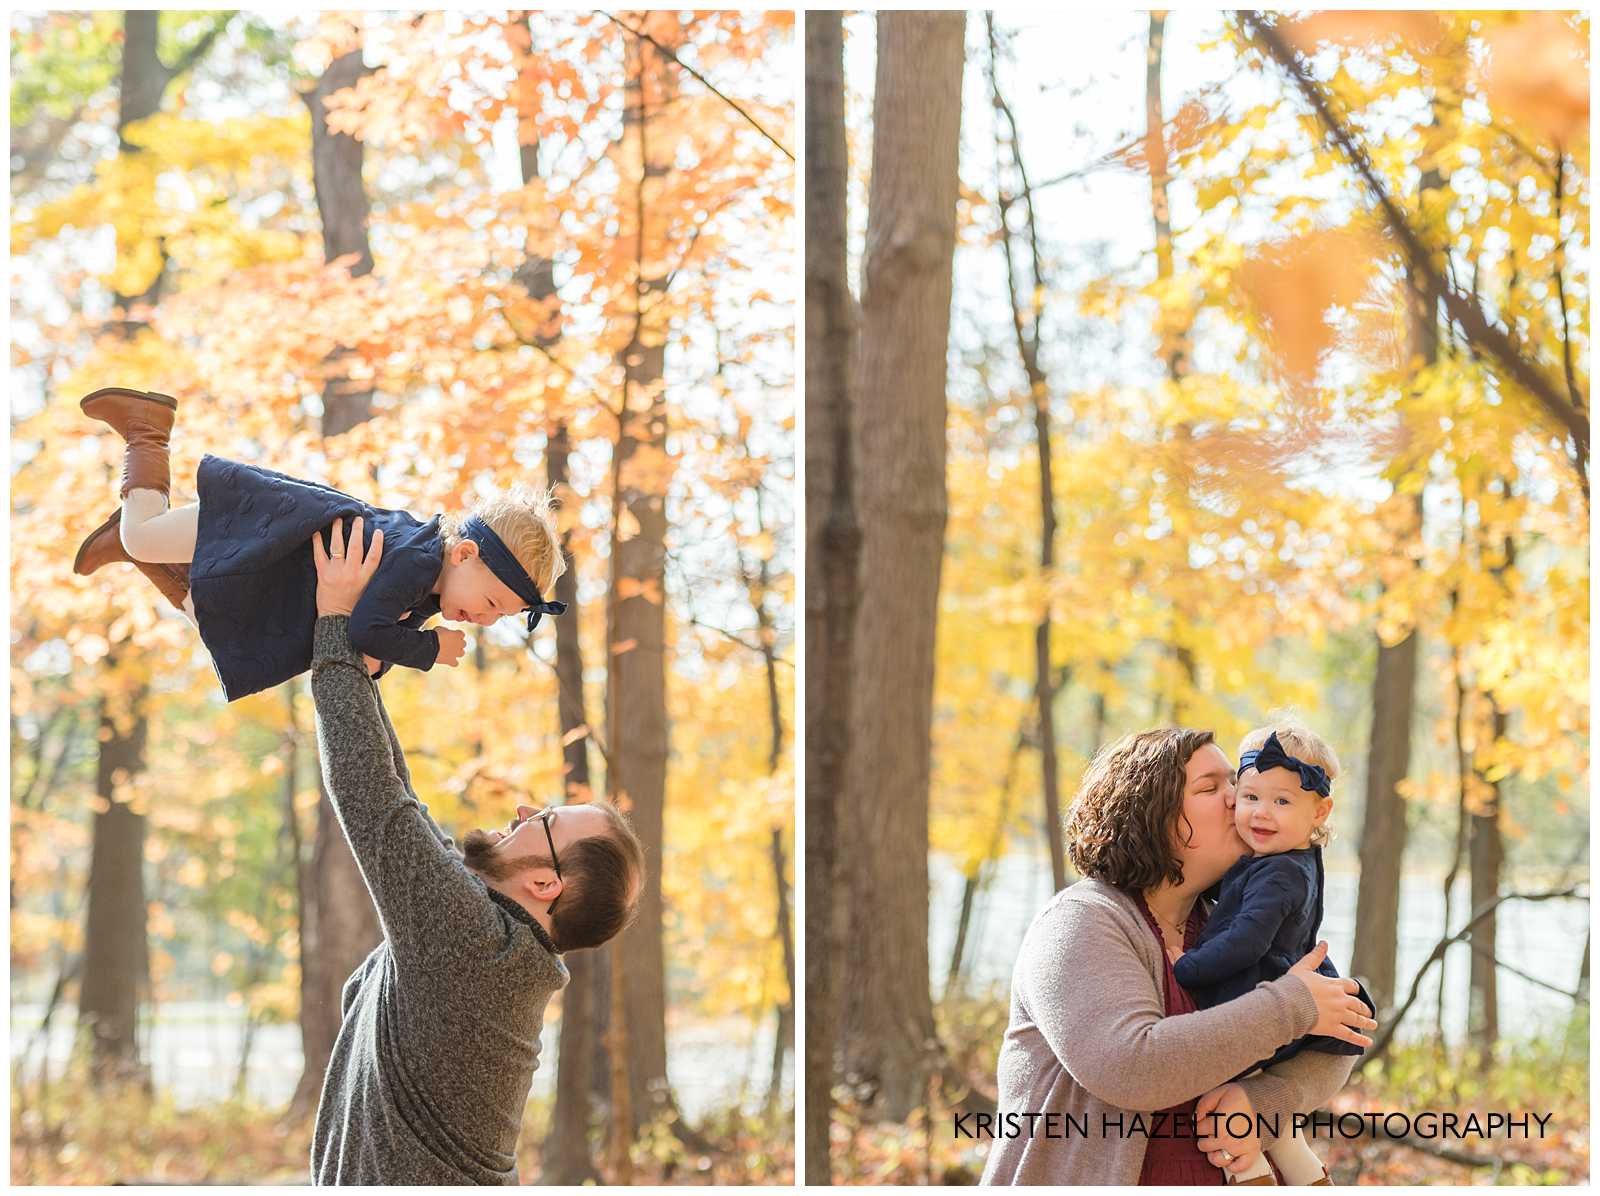 Mom, Dad, and toddler daughter playing under fall leaves